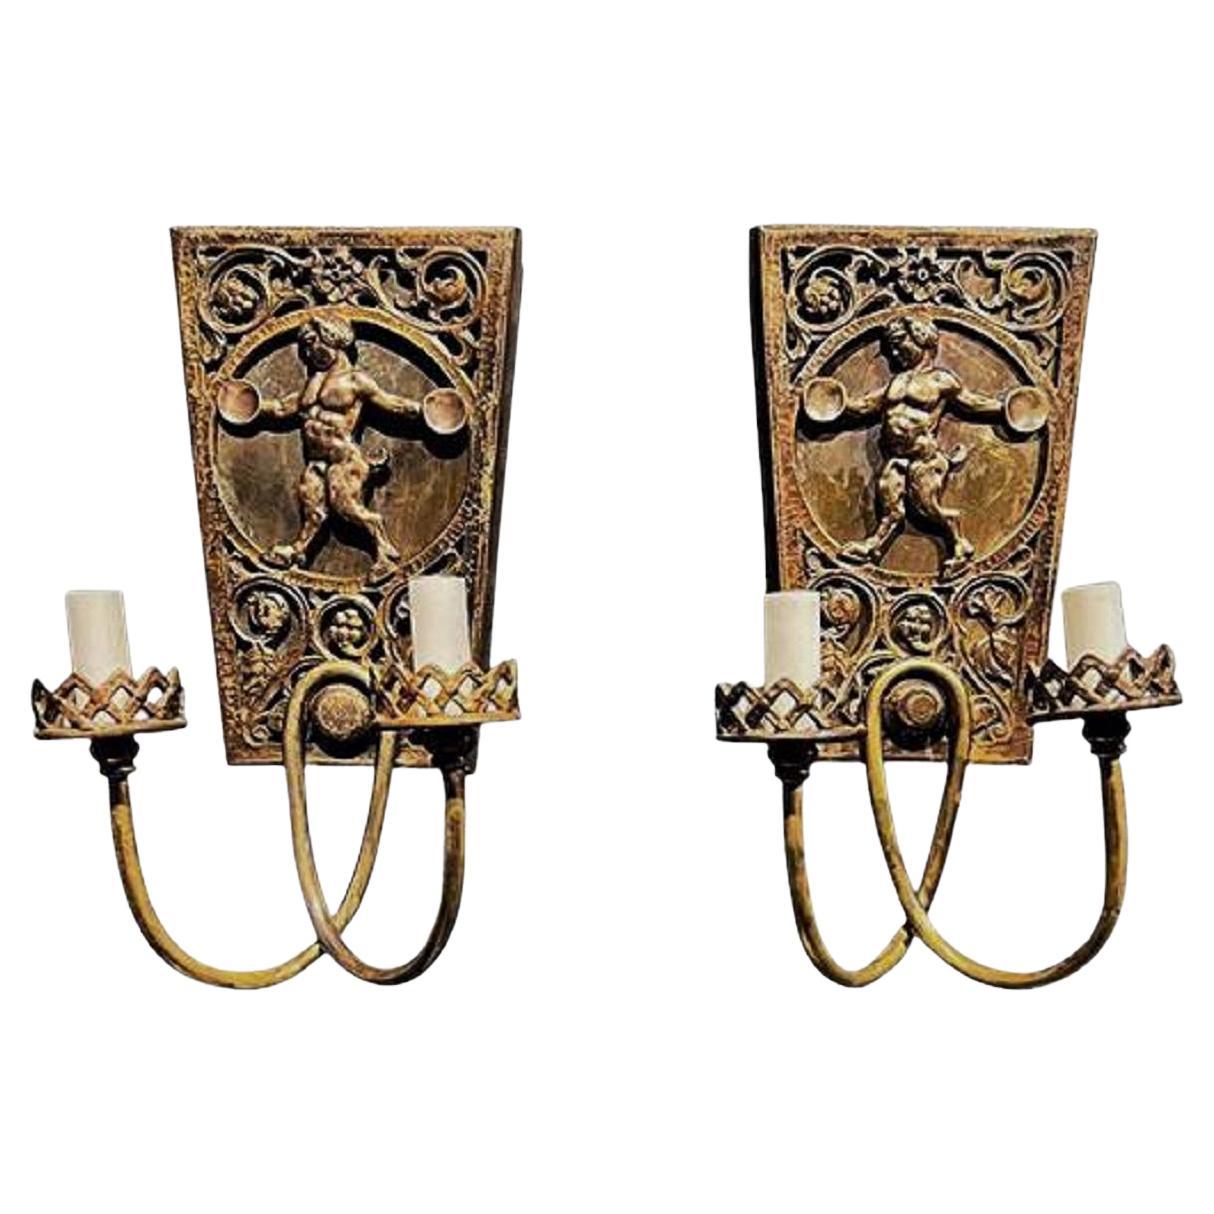 1920's Oscar Bach Gothic style Brown Patinated Sconces